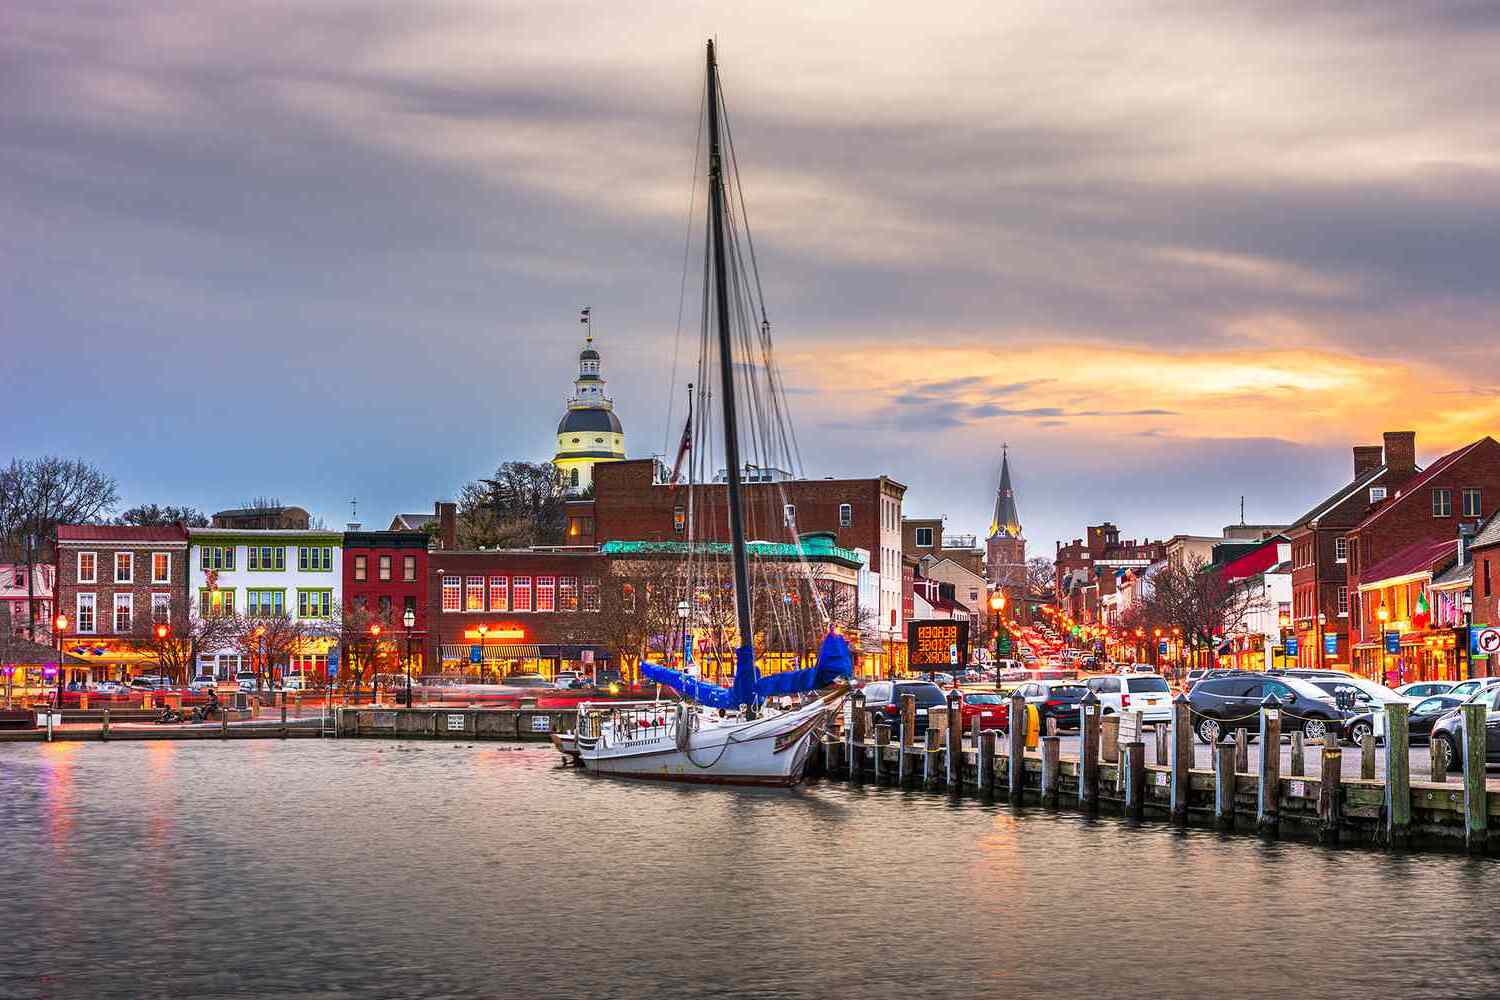 15-facts-about-music-history-in-annapolis-maryland